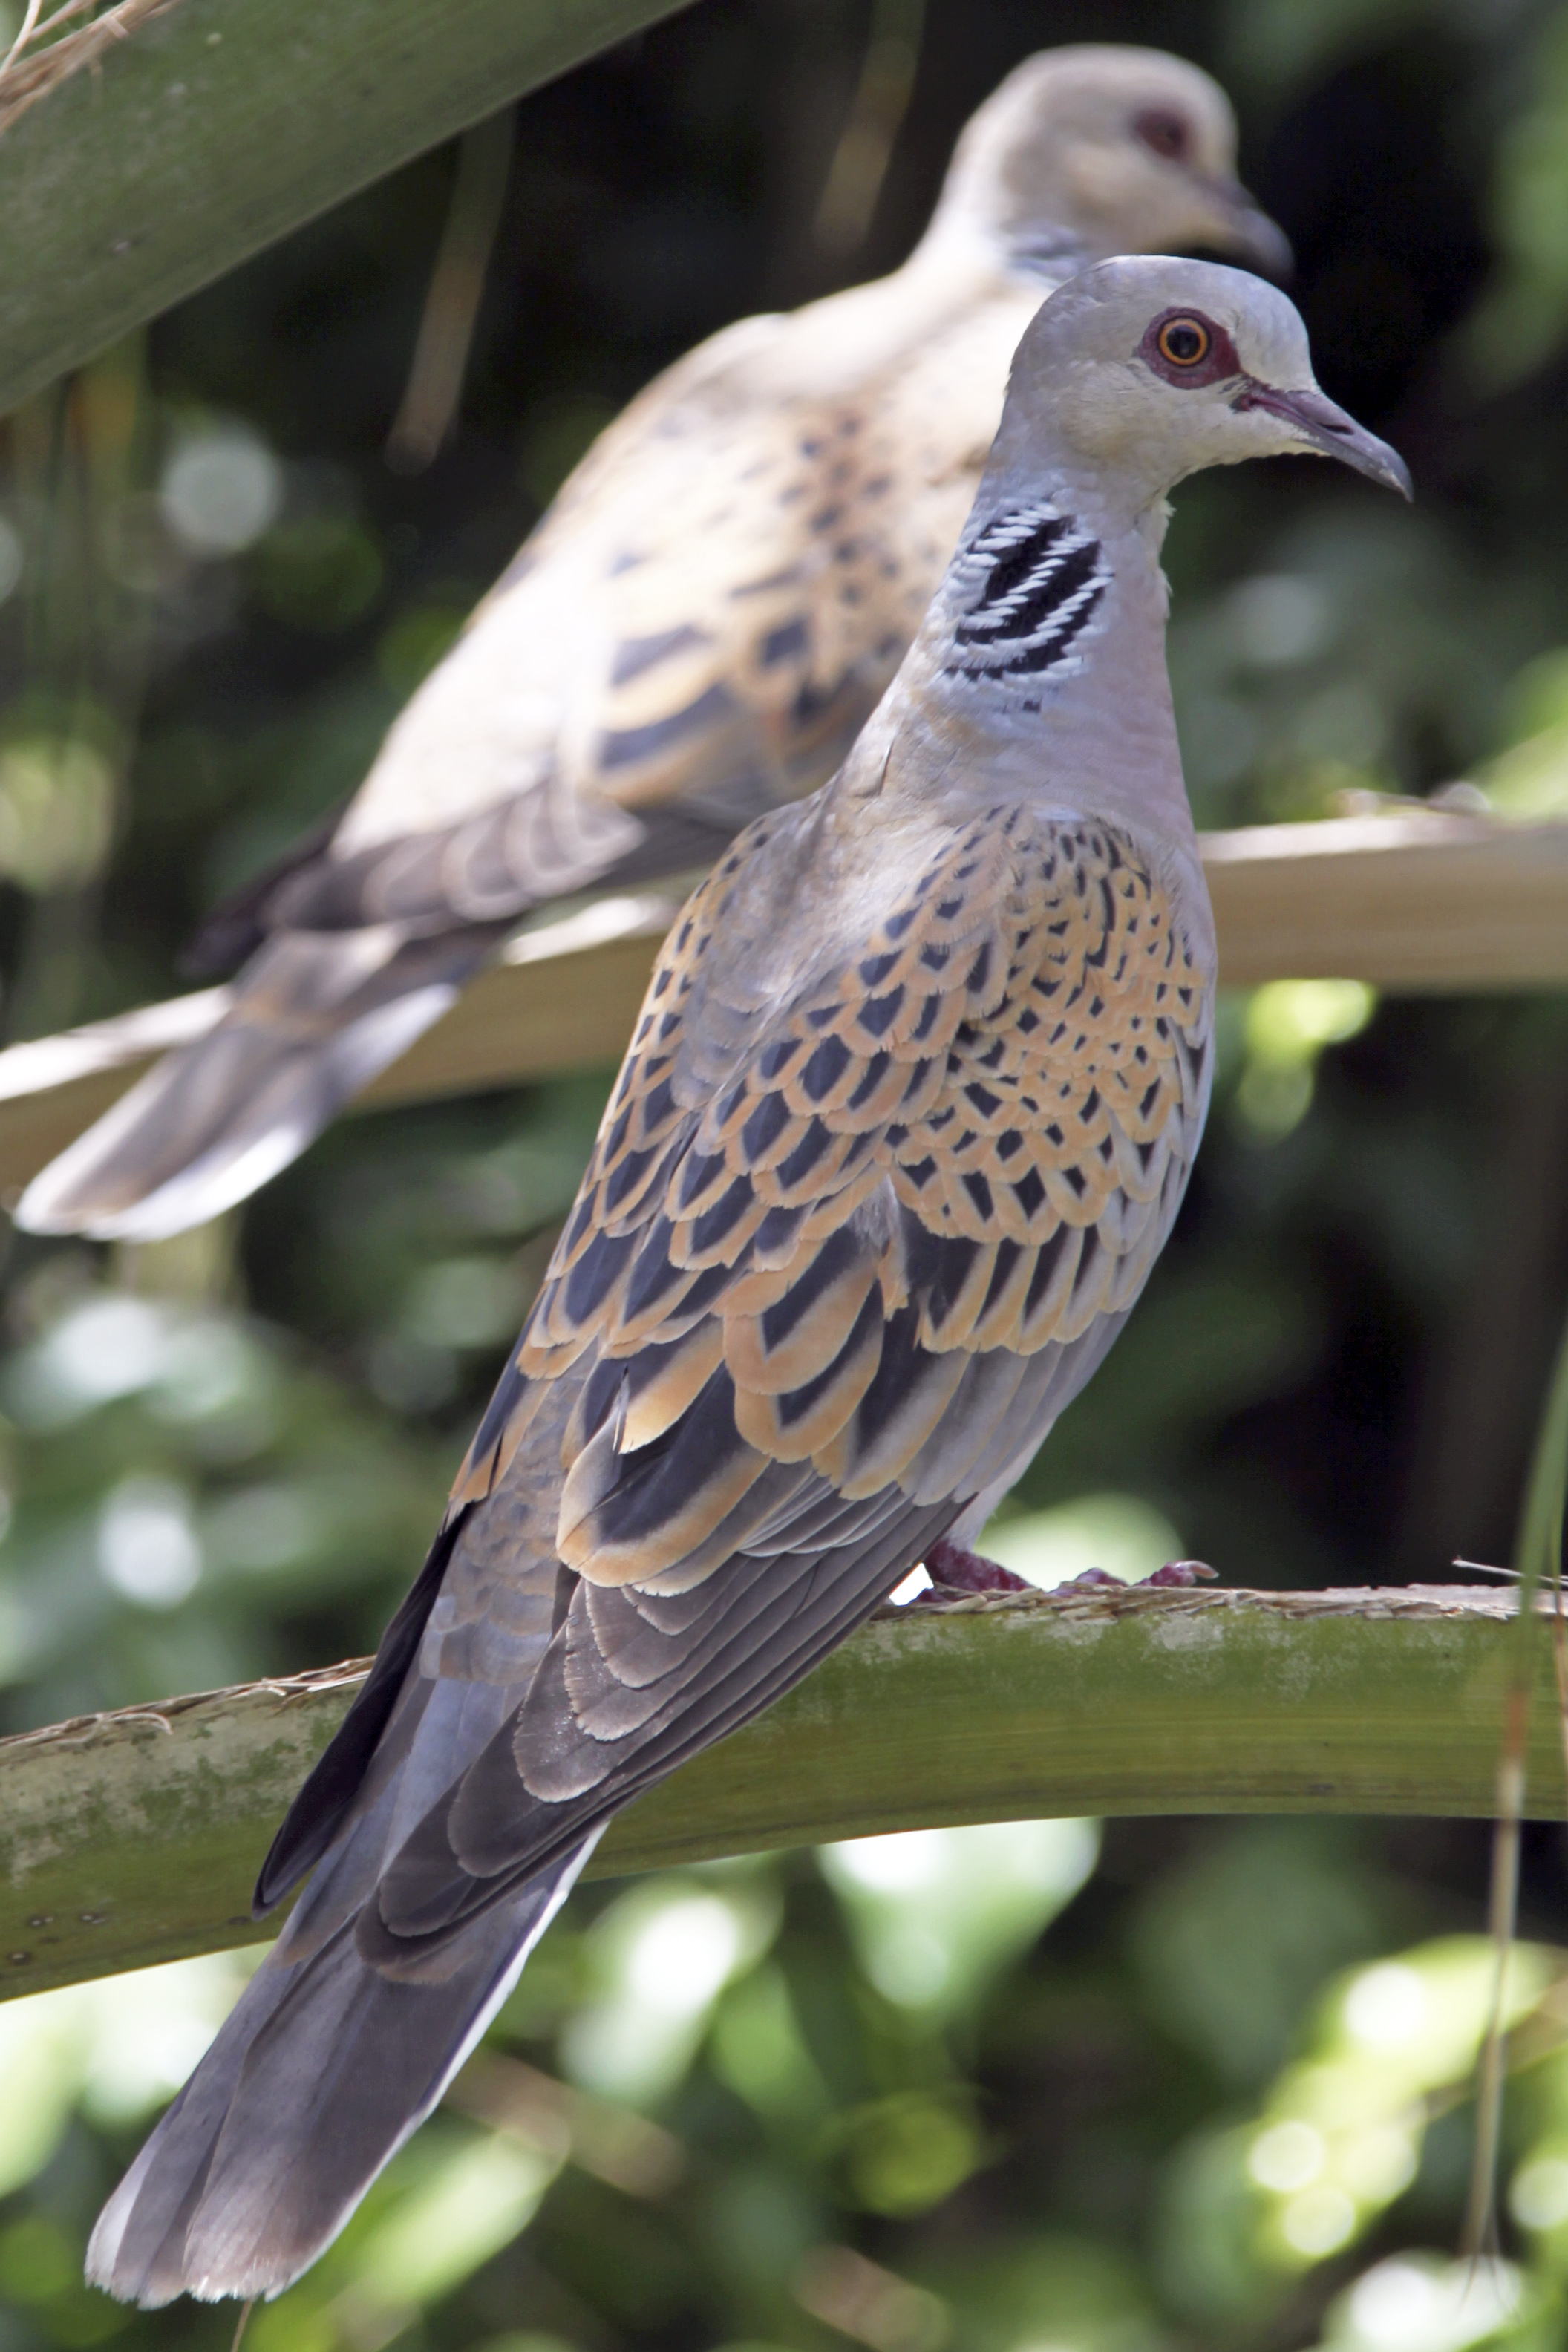 What would you call a group of turtle doves?